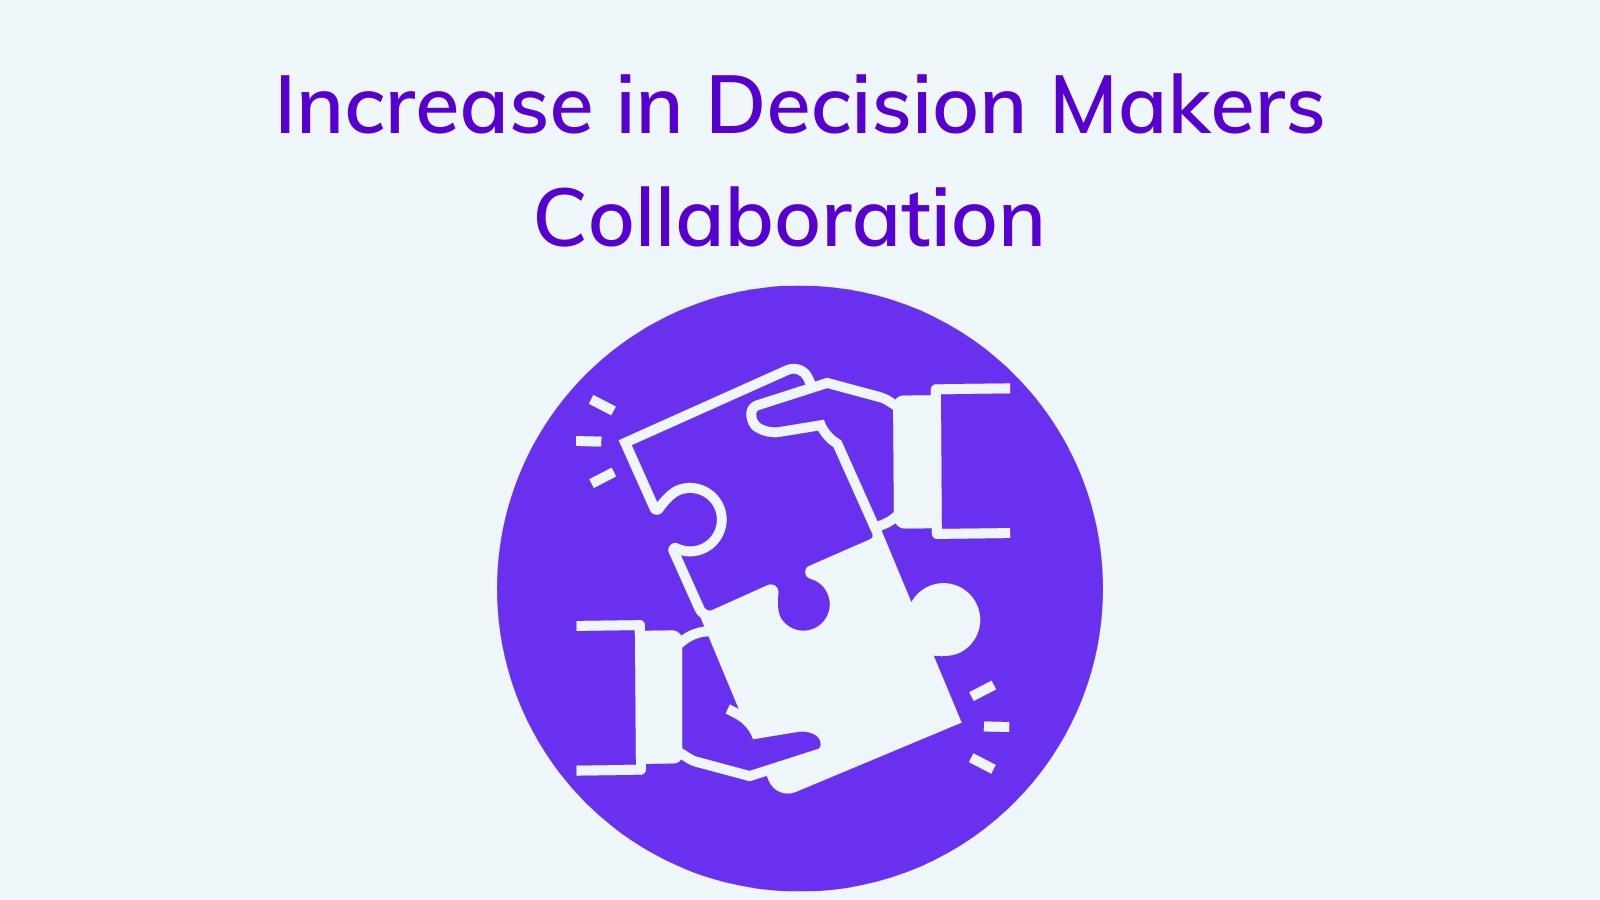 Increase in Decision Makers Collaboration on agilitycms.com